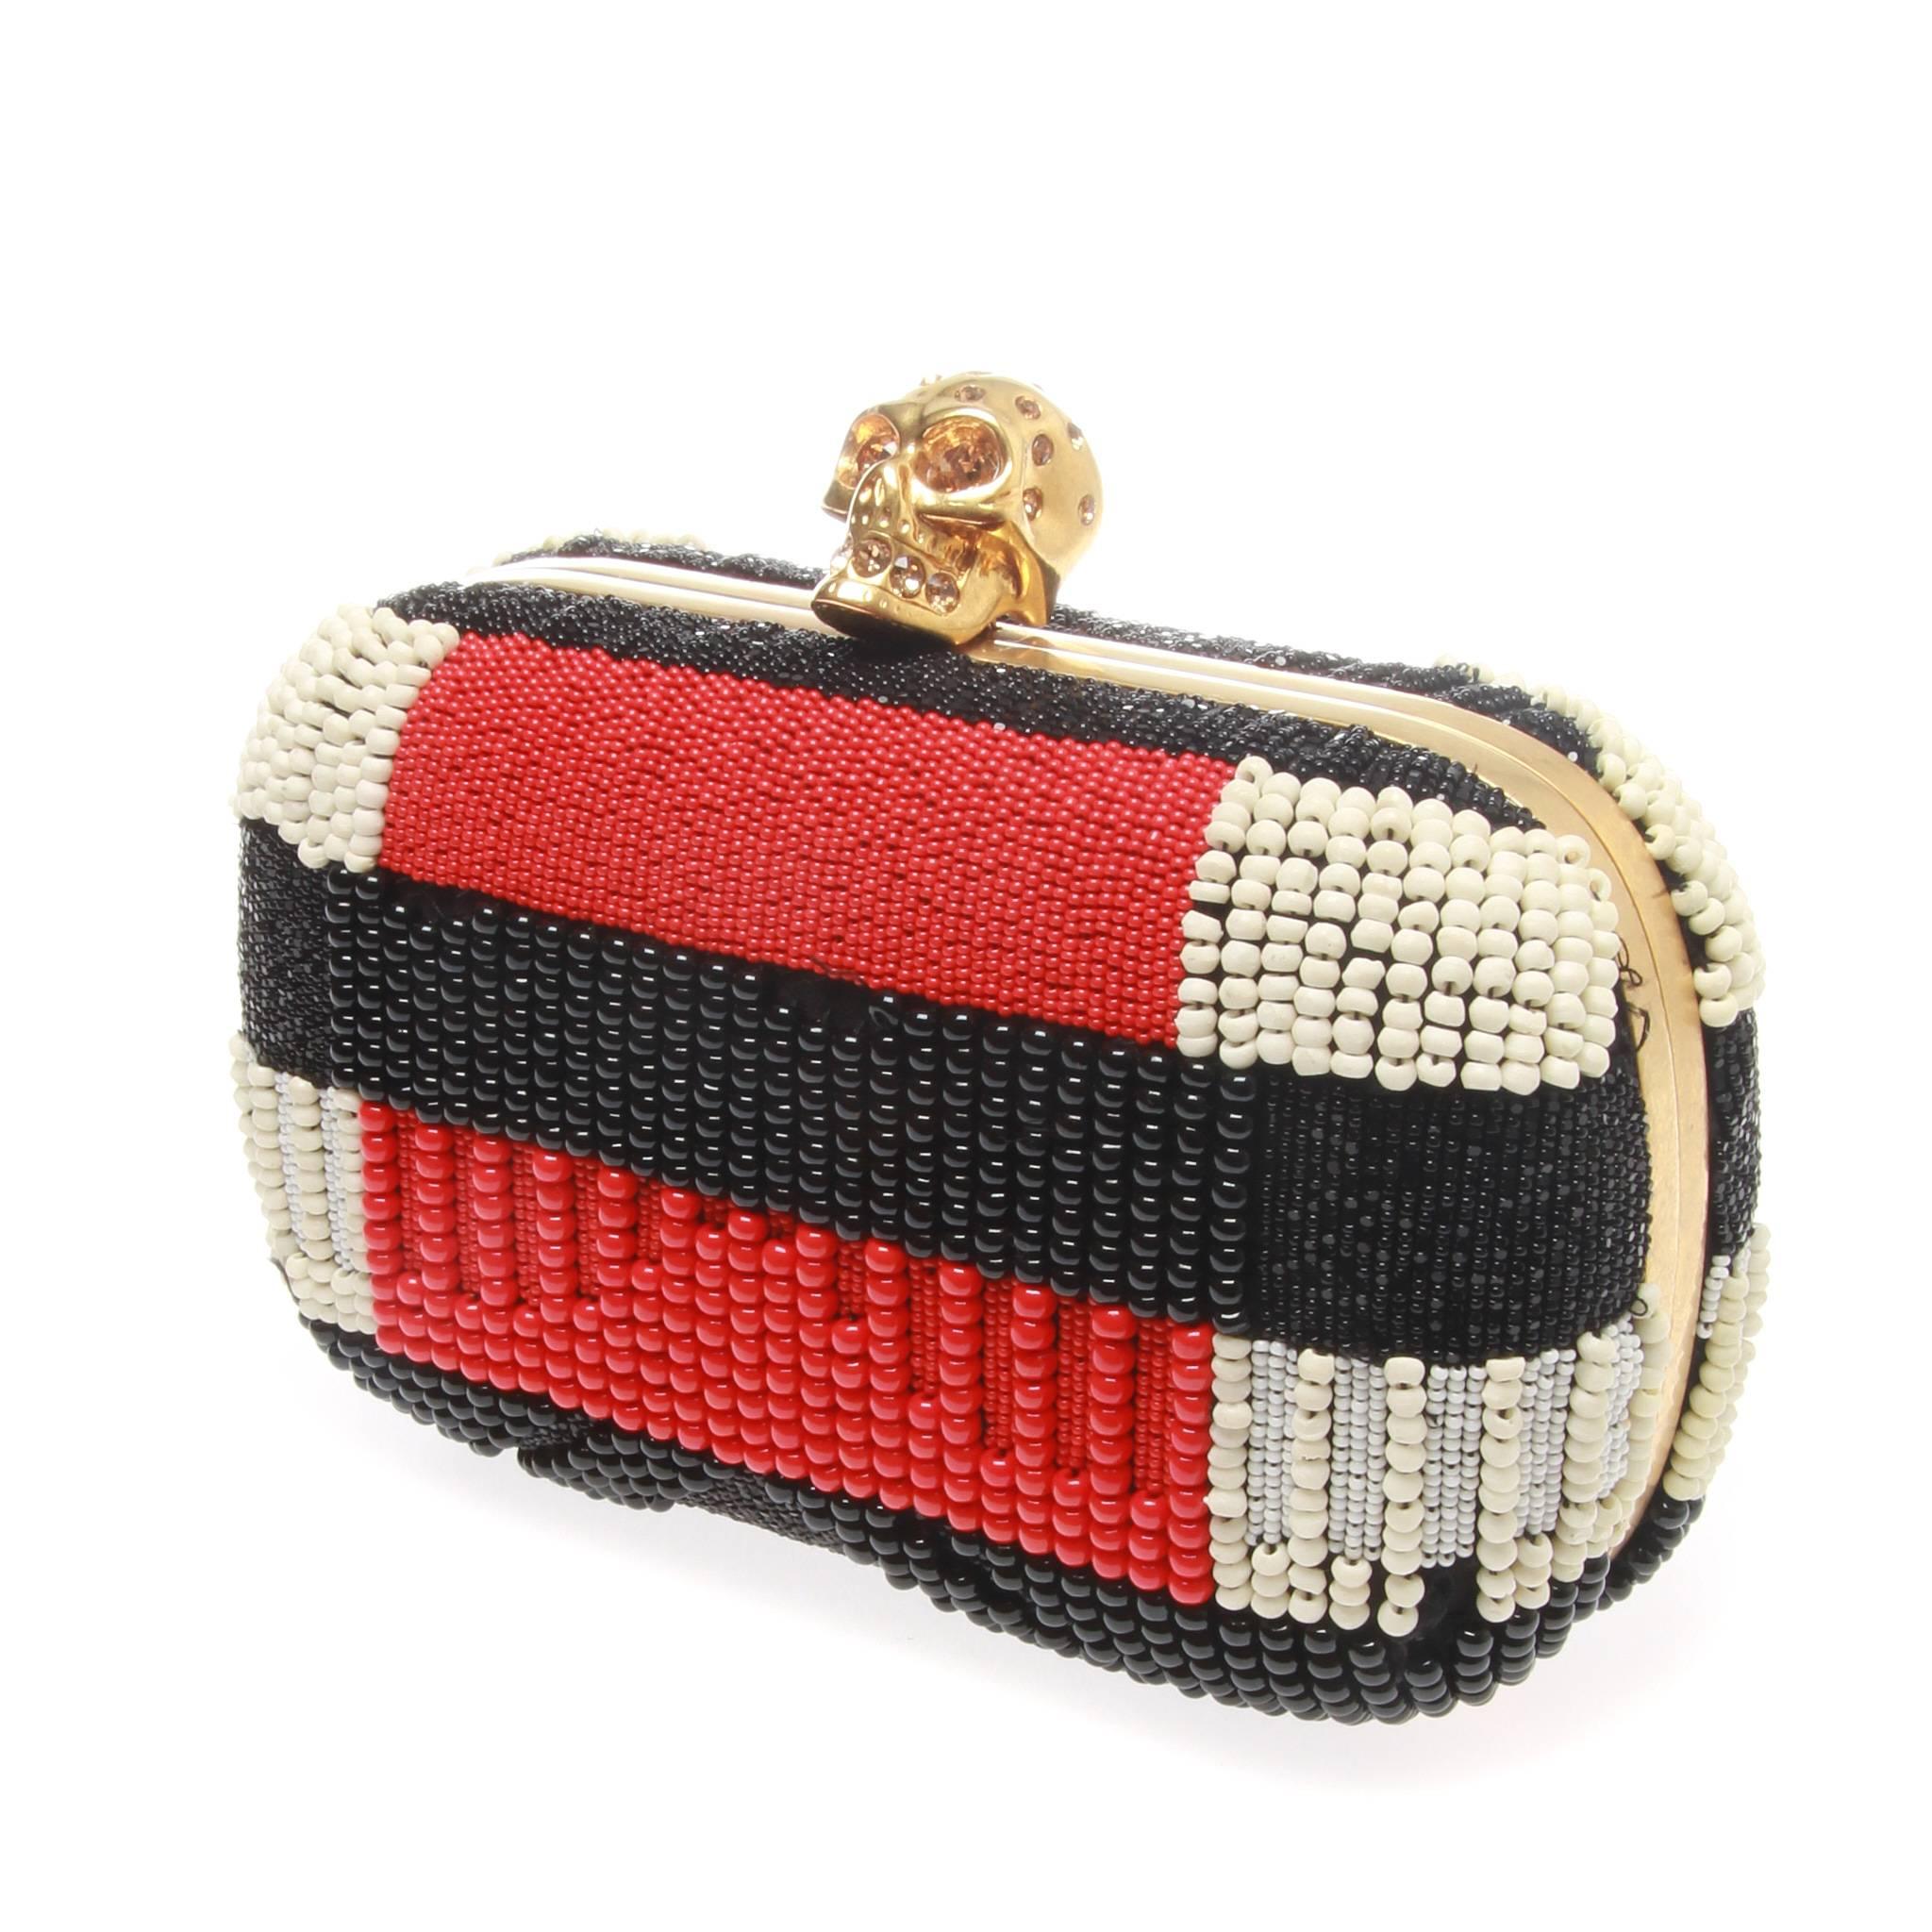 Alexander McQueen Beaded Clutch

An All-over red, black, white bead embellishment.
Beautifully crafted Gold-tone frame.
Swarovski crystal-embellished skull clasp.
Leather-lined interior
Closure/Opening: Skull Clasp
Interior: Leather Lining